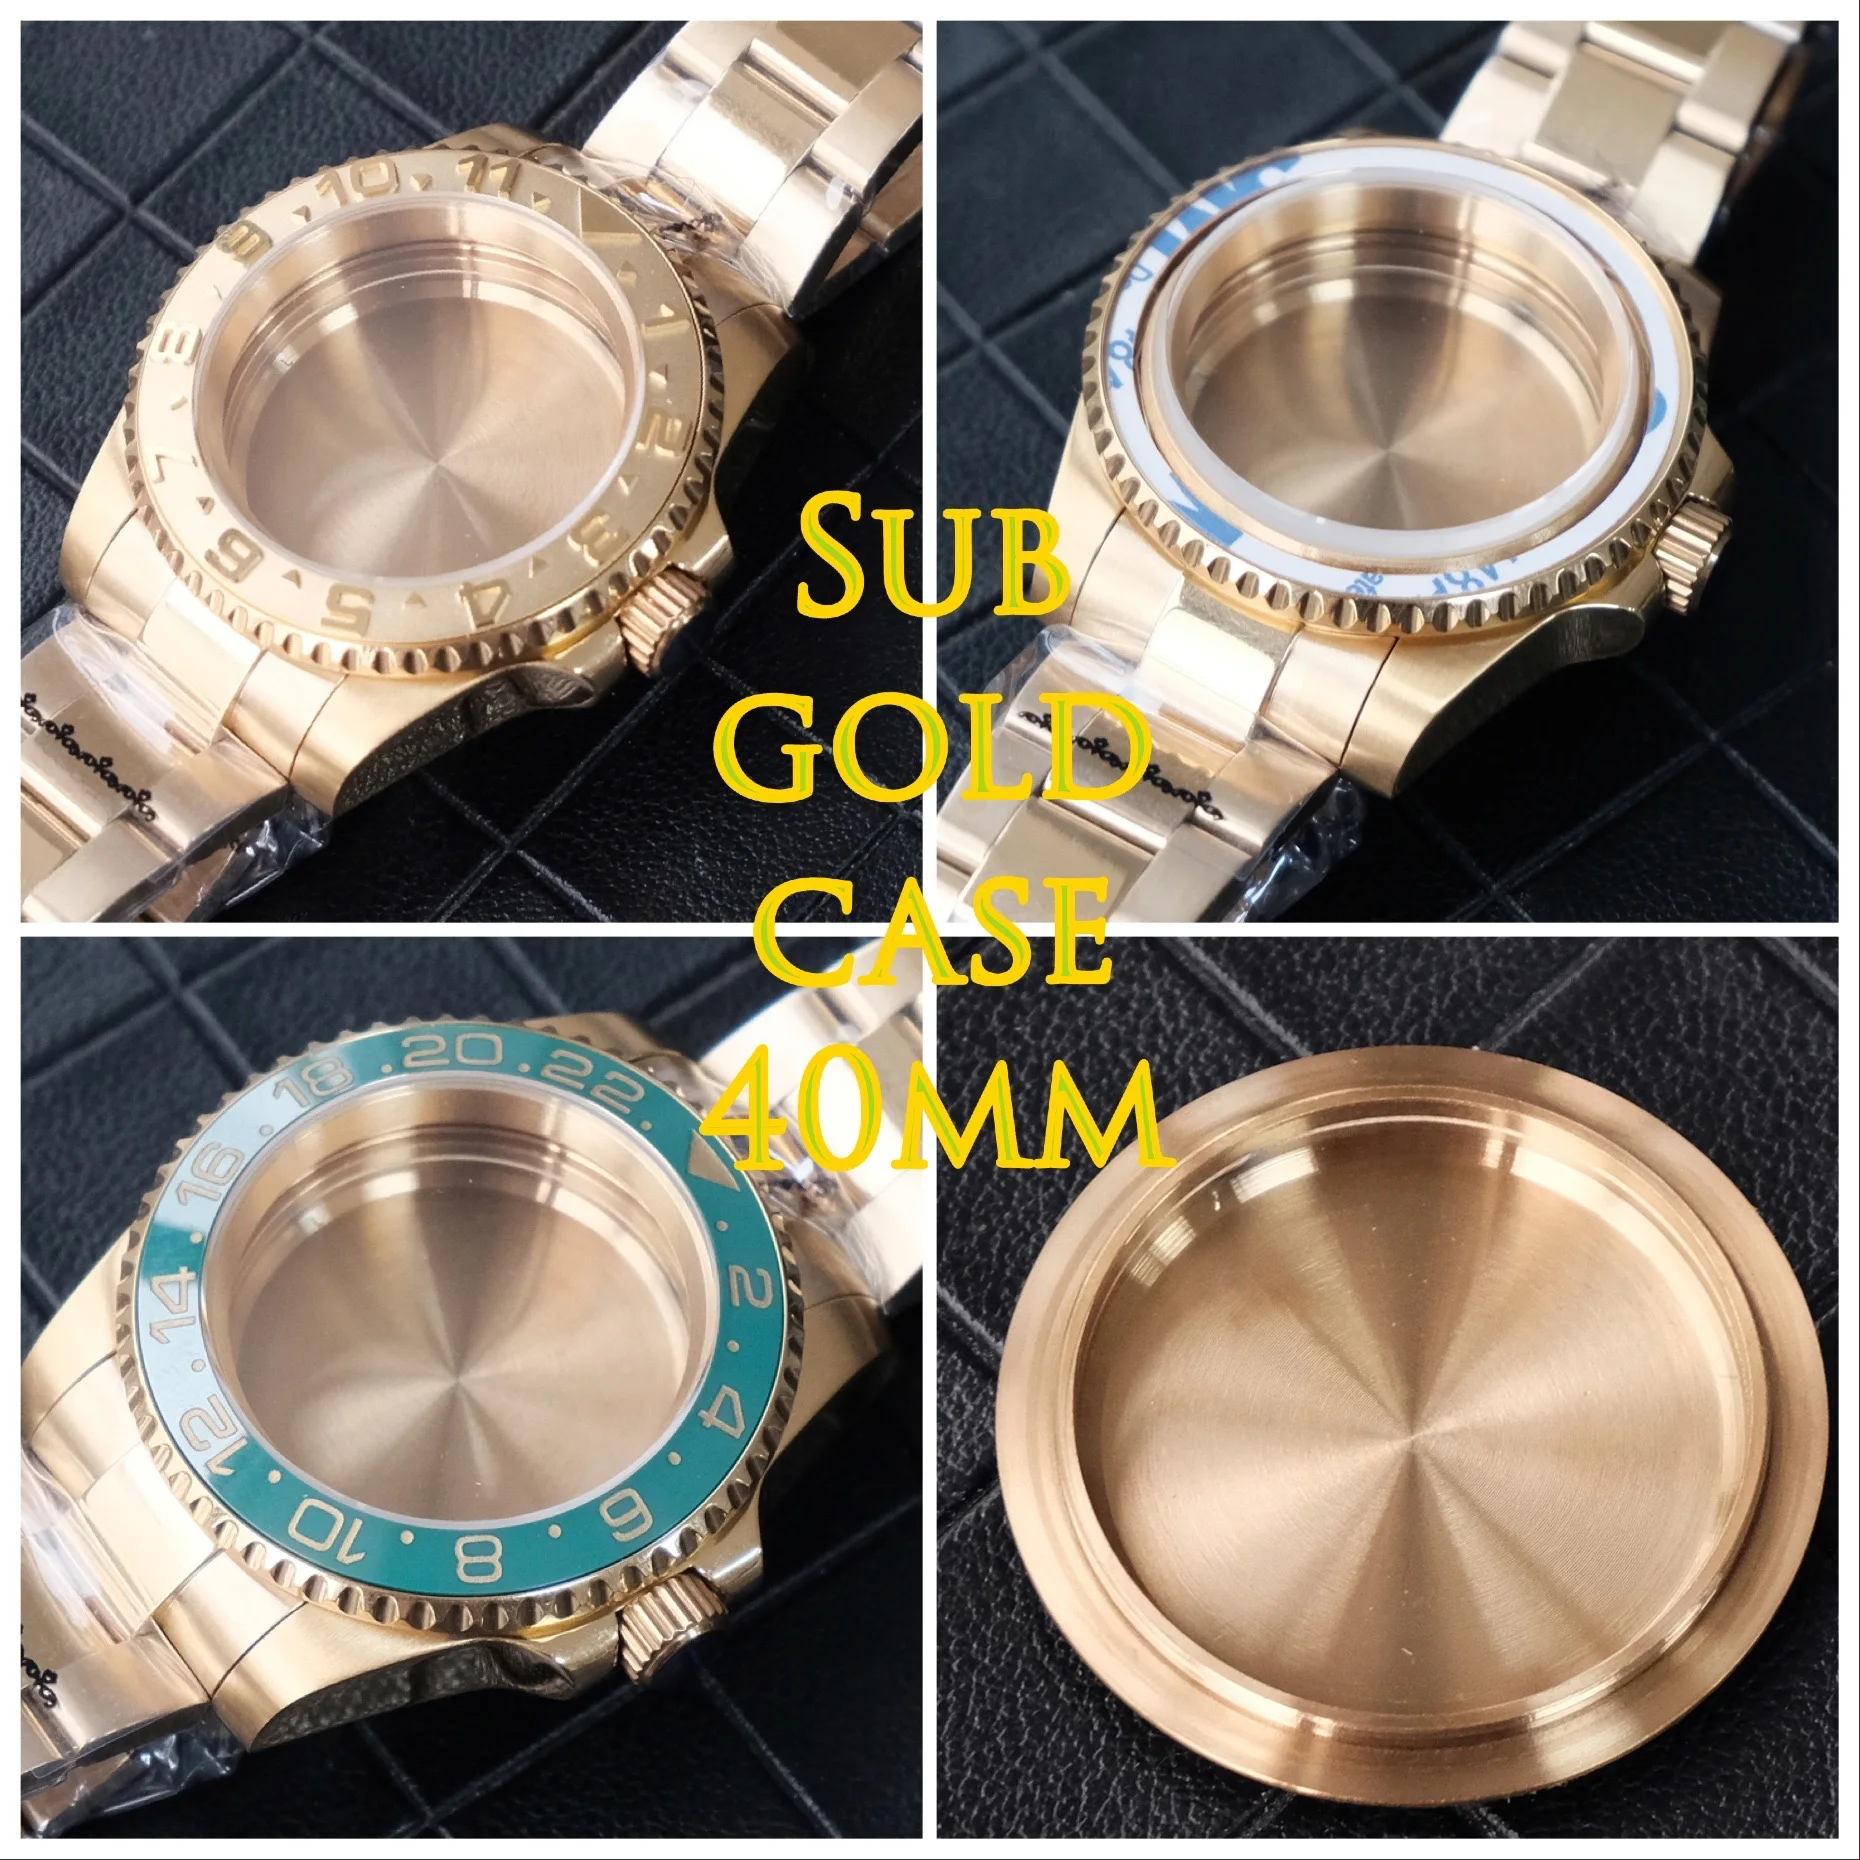 

40mm Sub Stainless Steel PVD Gold Case NH35/NH36 Movement Watch Sapphire Glass Mod Accessories 28.5mm Dial Adjustable Watchband